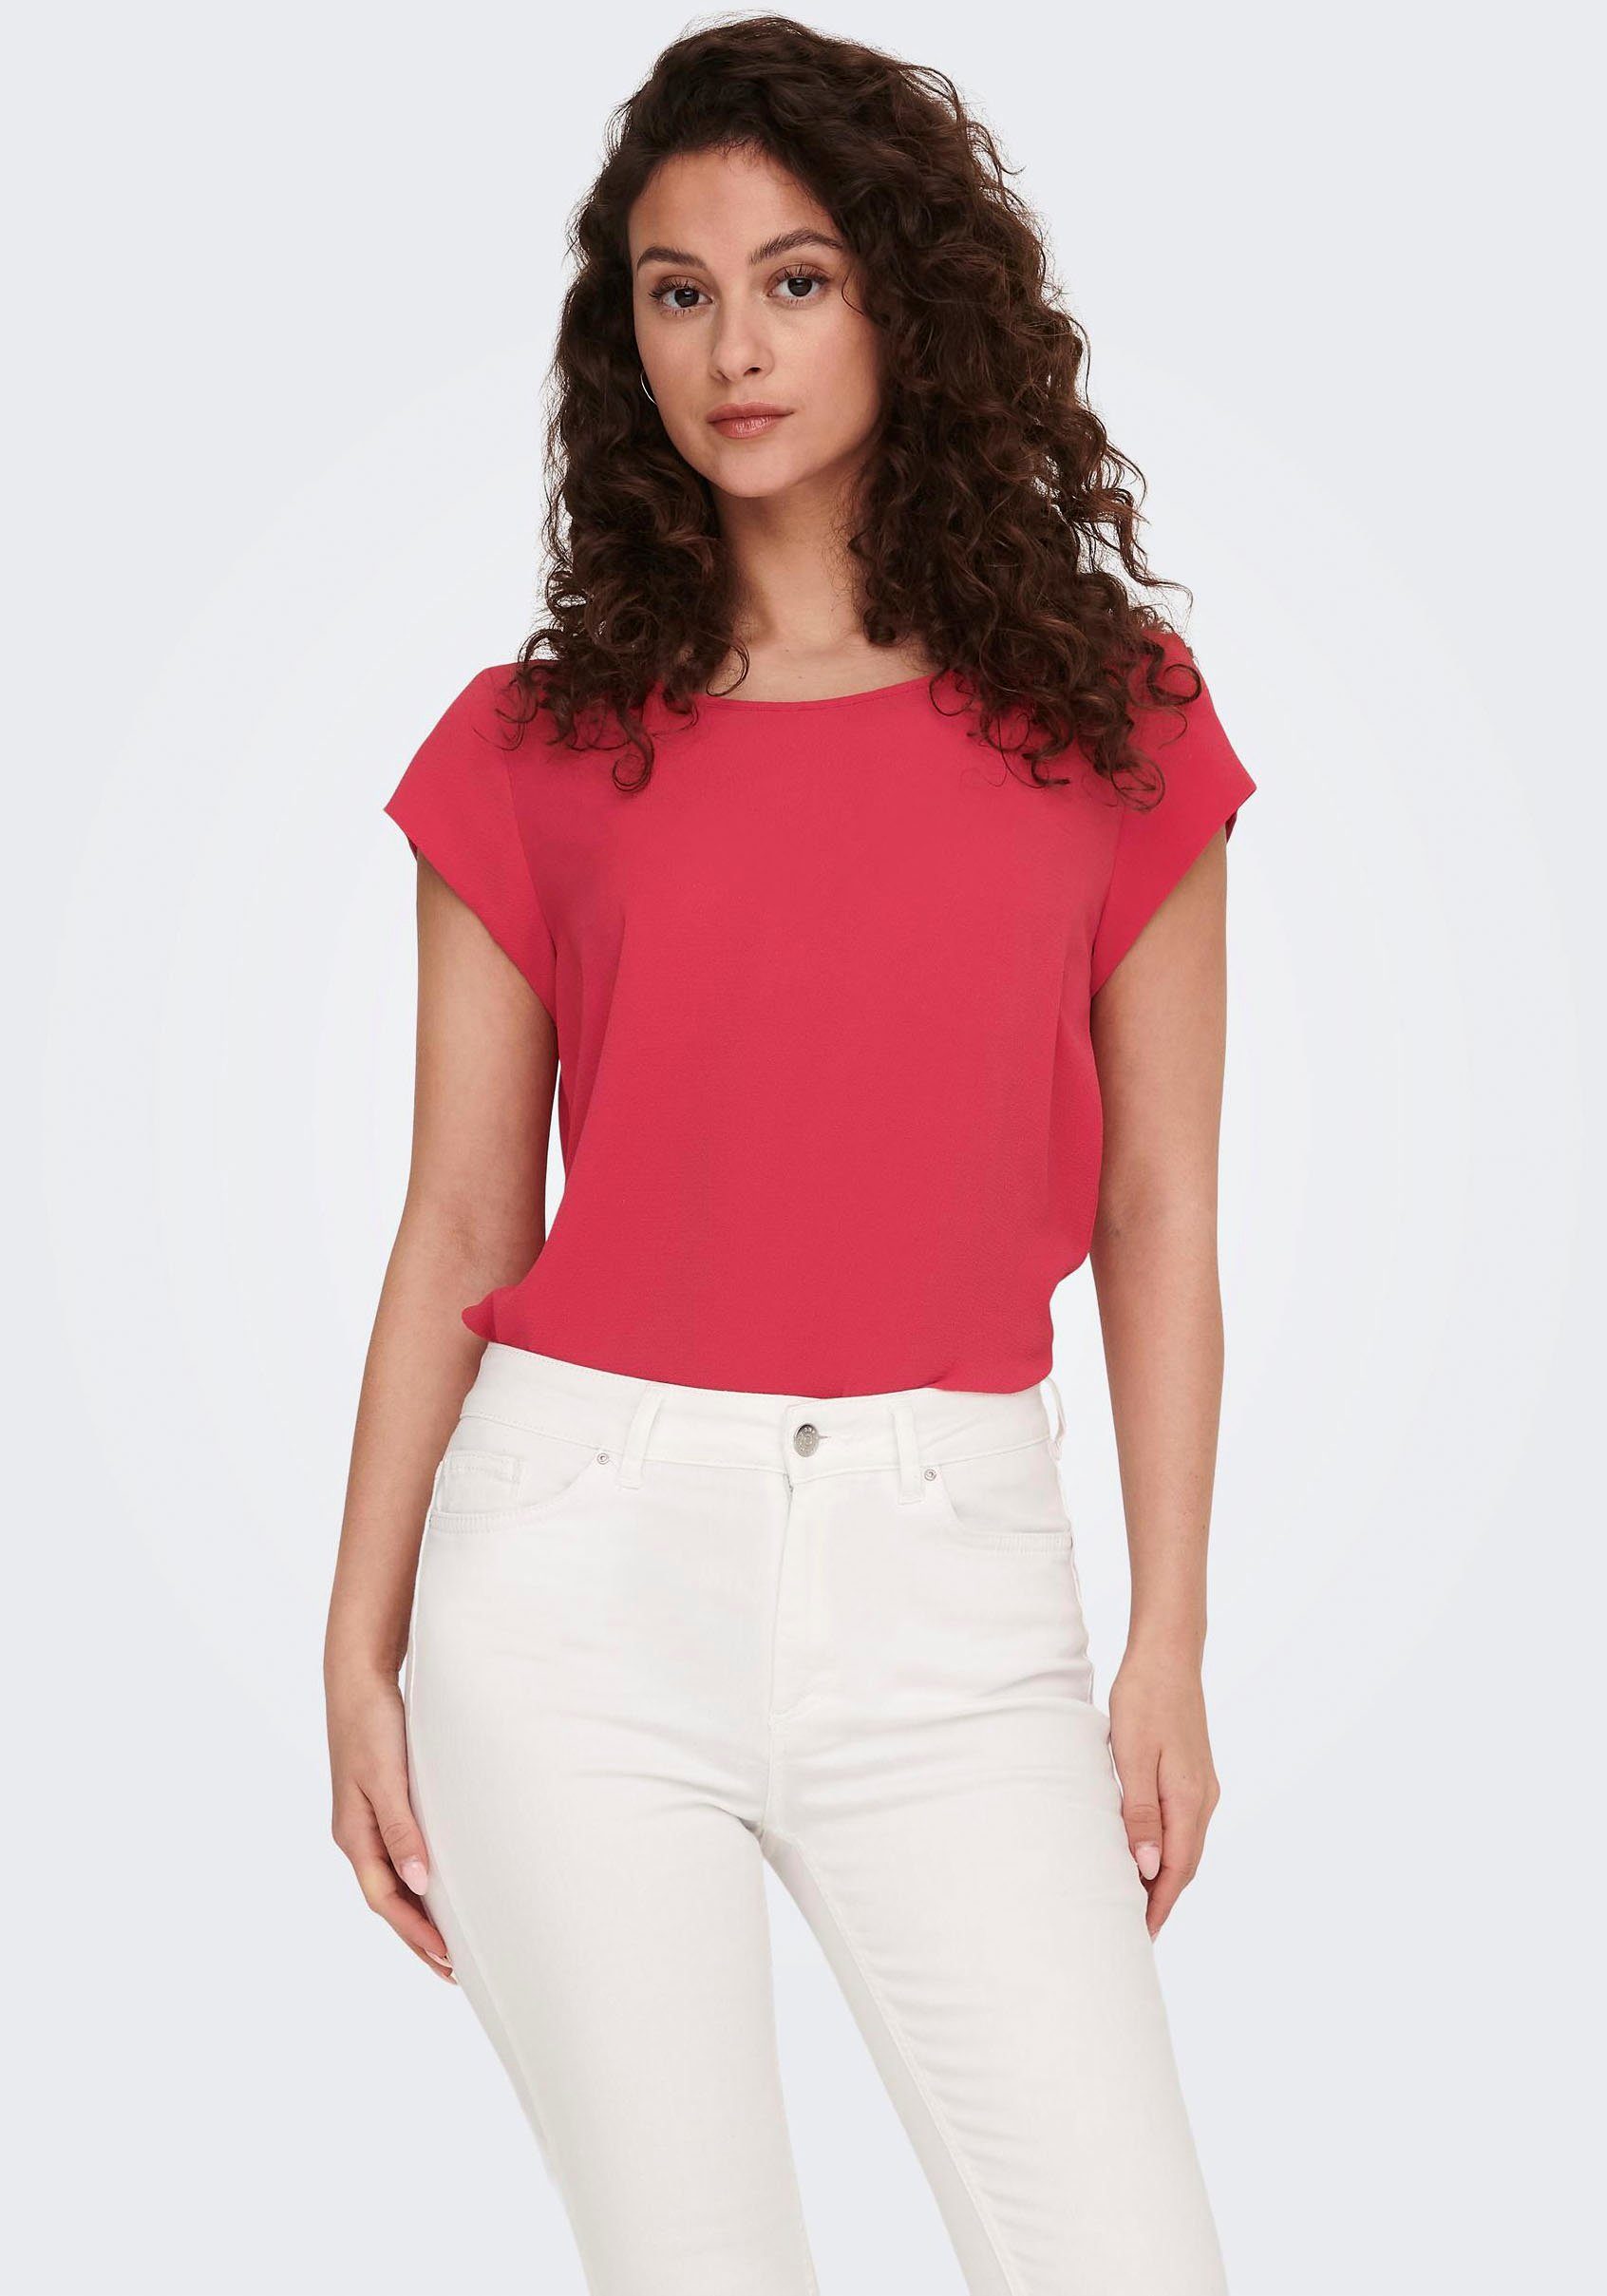 PTM ONLVIC Kurzarmbluse ONLY SOLID S/S Teaberry TOP NOOS